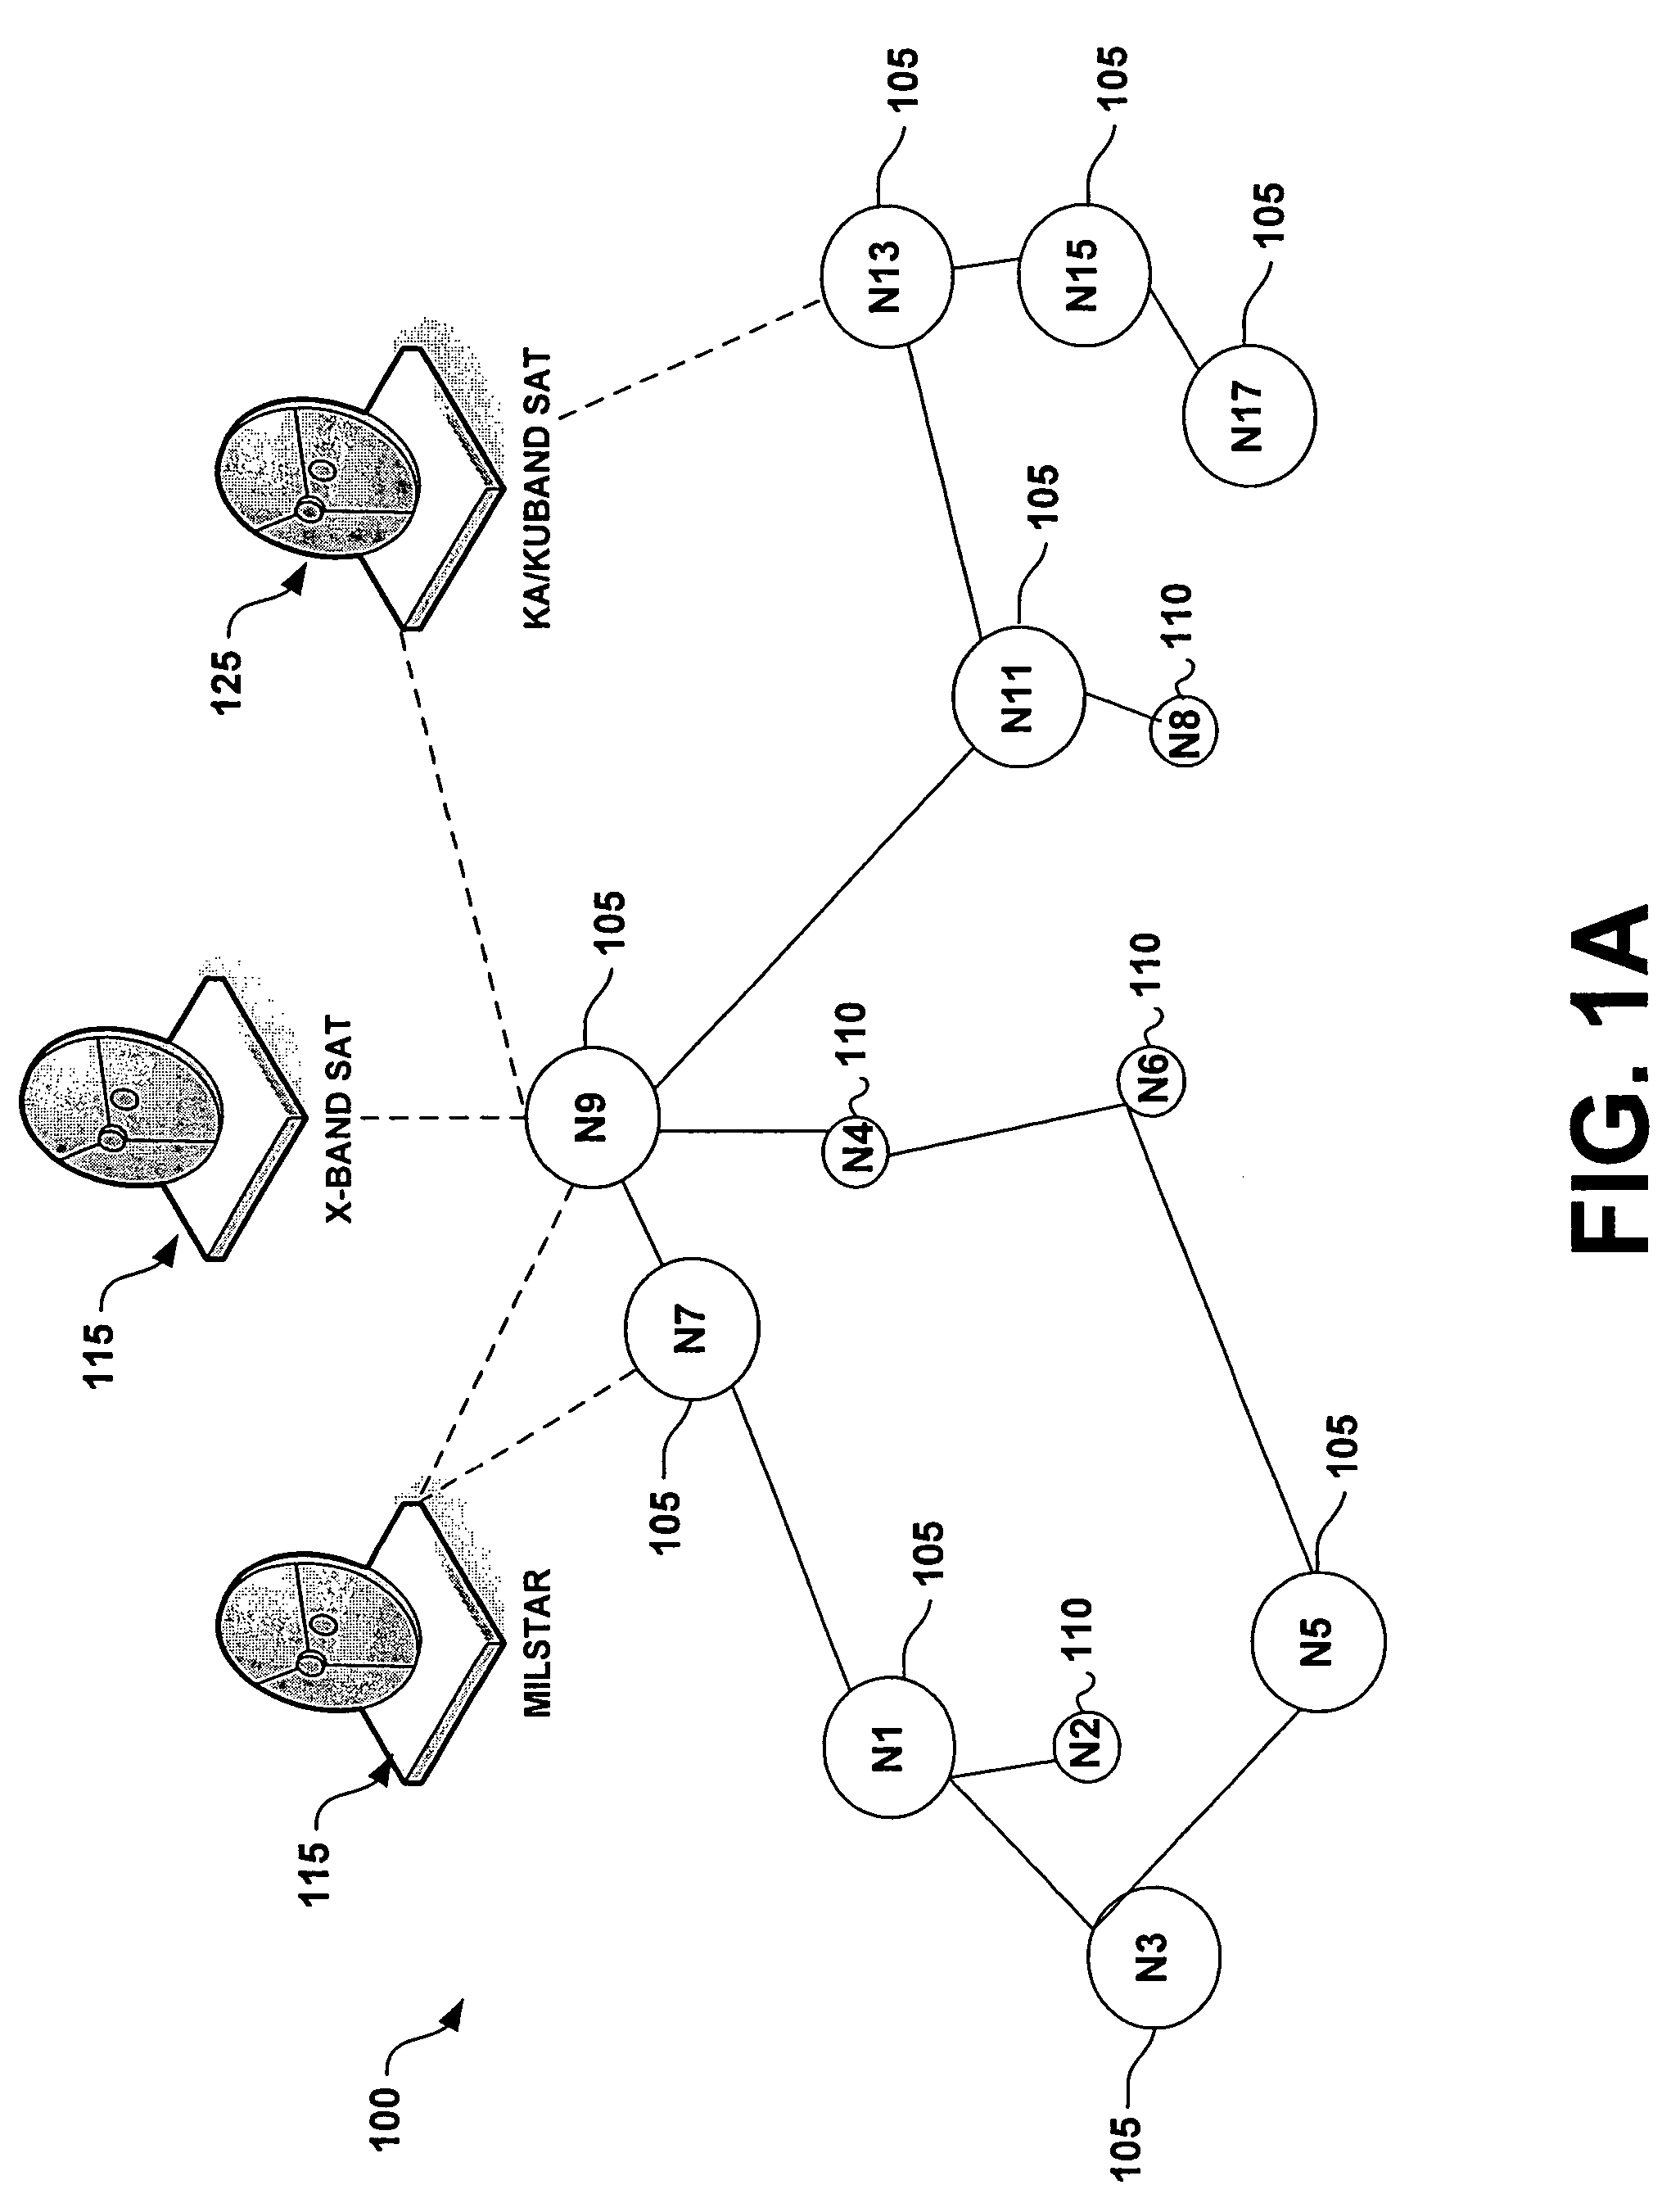 Distributed networking agent and method of making and using the same